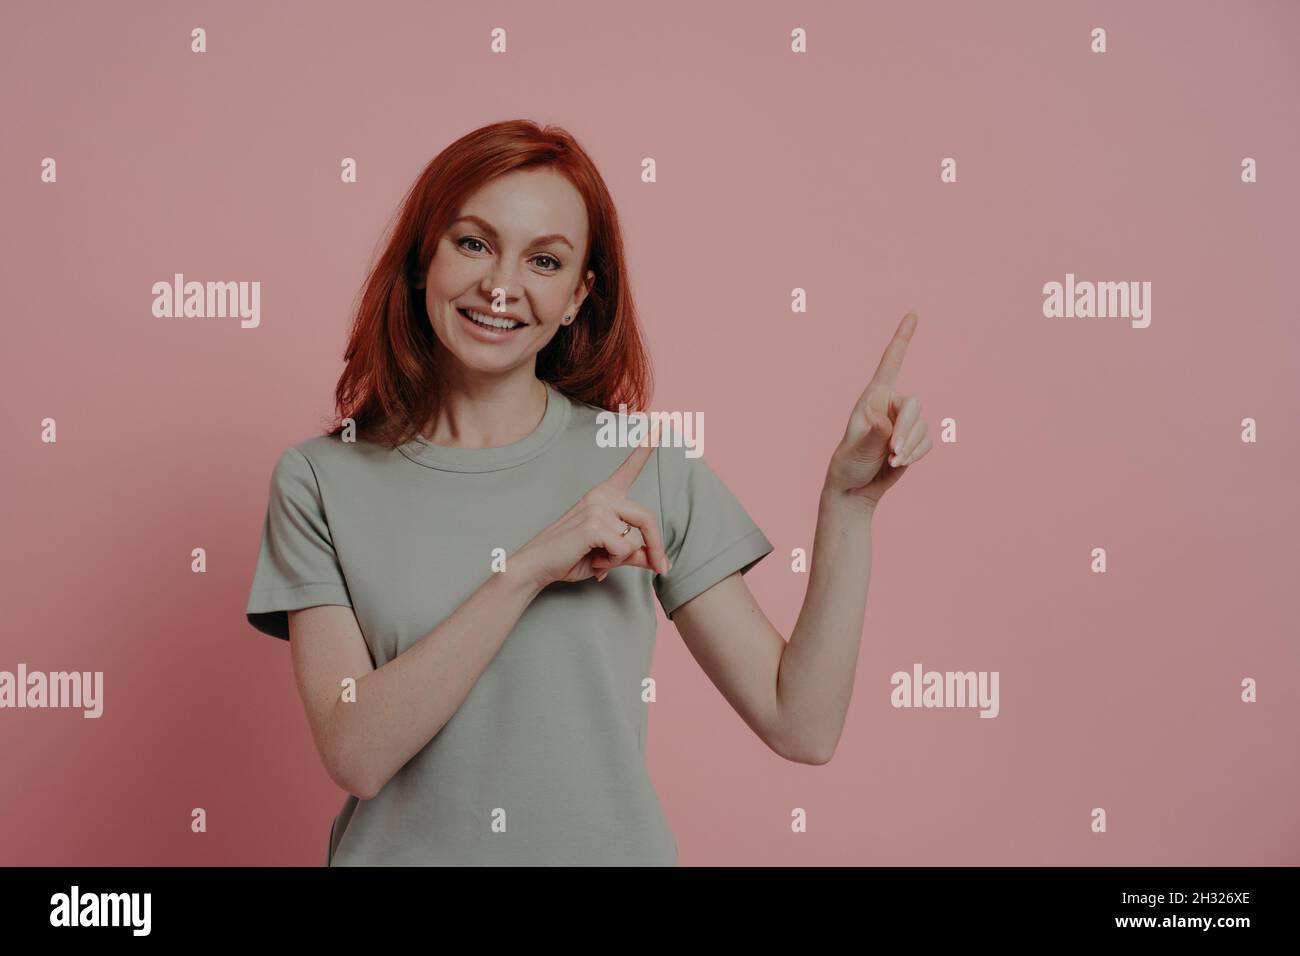 Satisfied pleased young redhead woman promoting product, pointing with index fingers at copy space Stock Photo